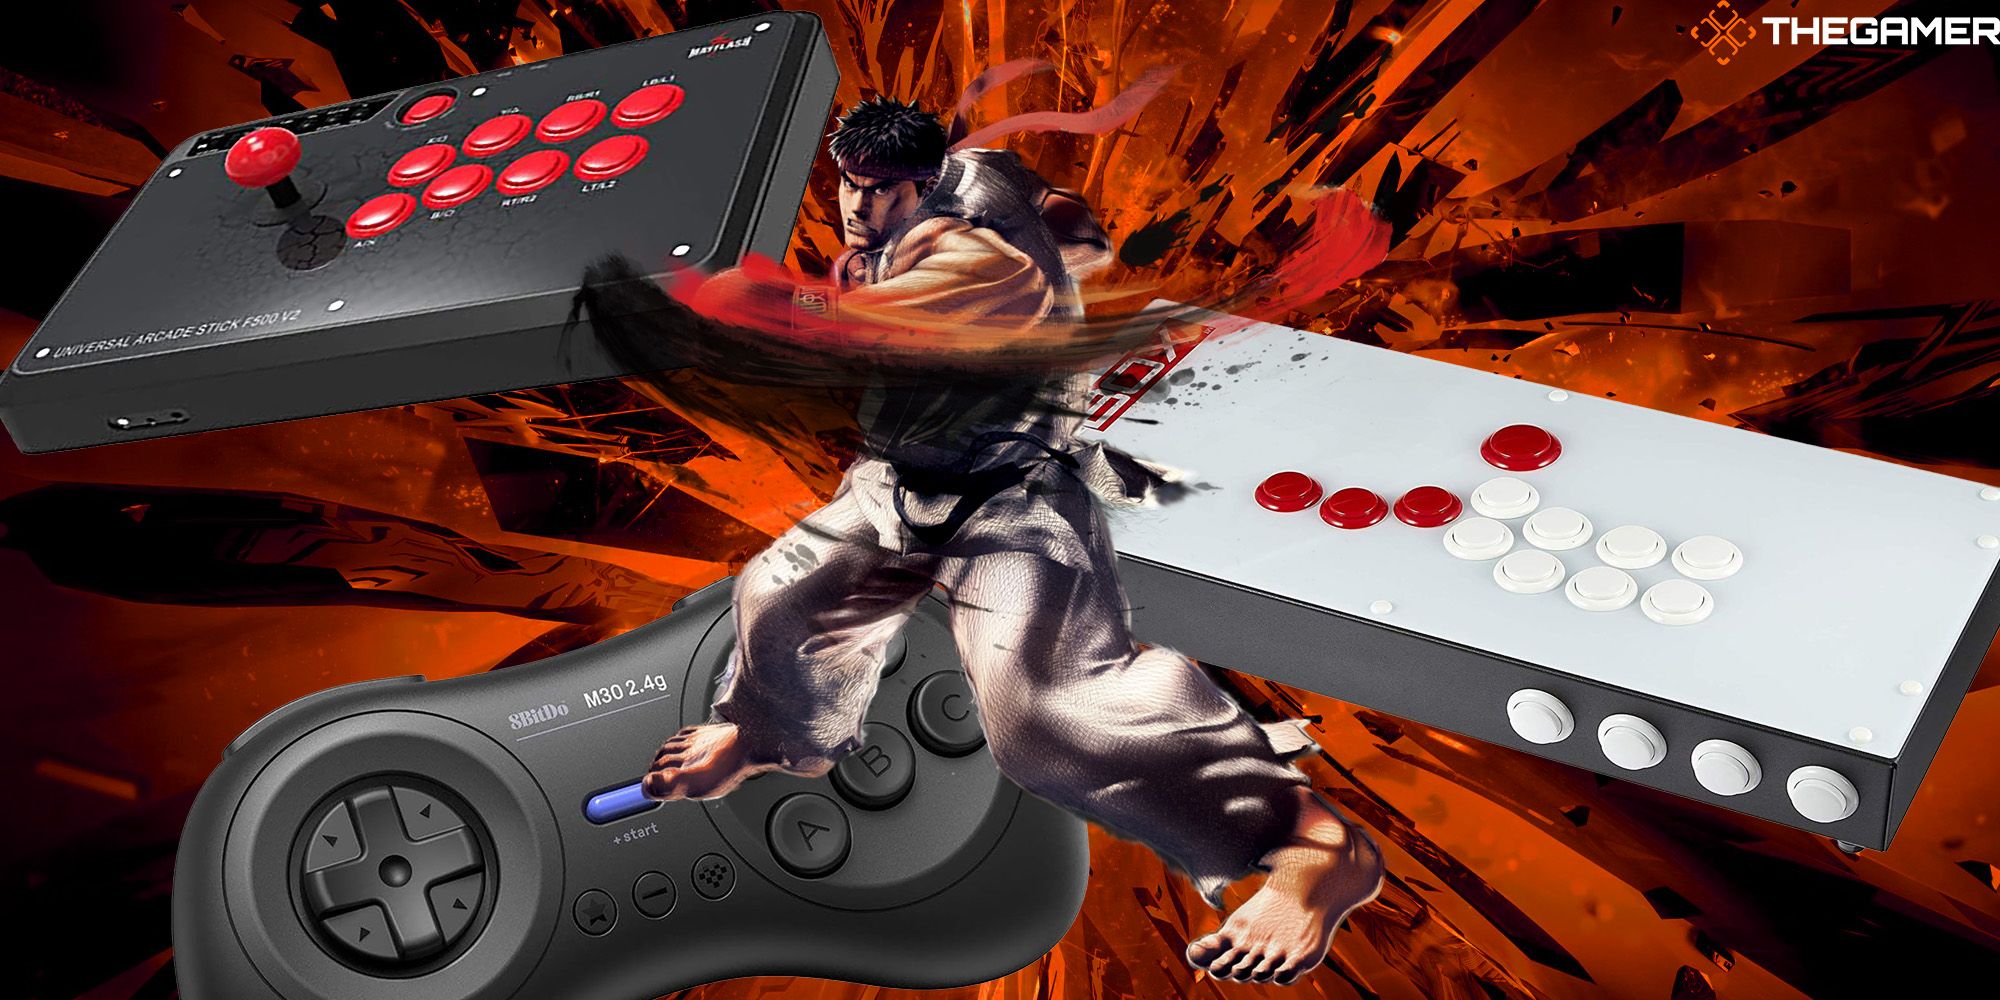 Impressionisme annuleren Extremisten What Are The Best Fighter Game Controllers?